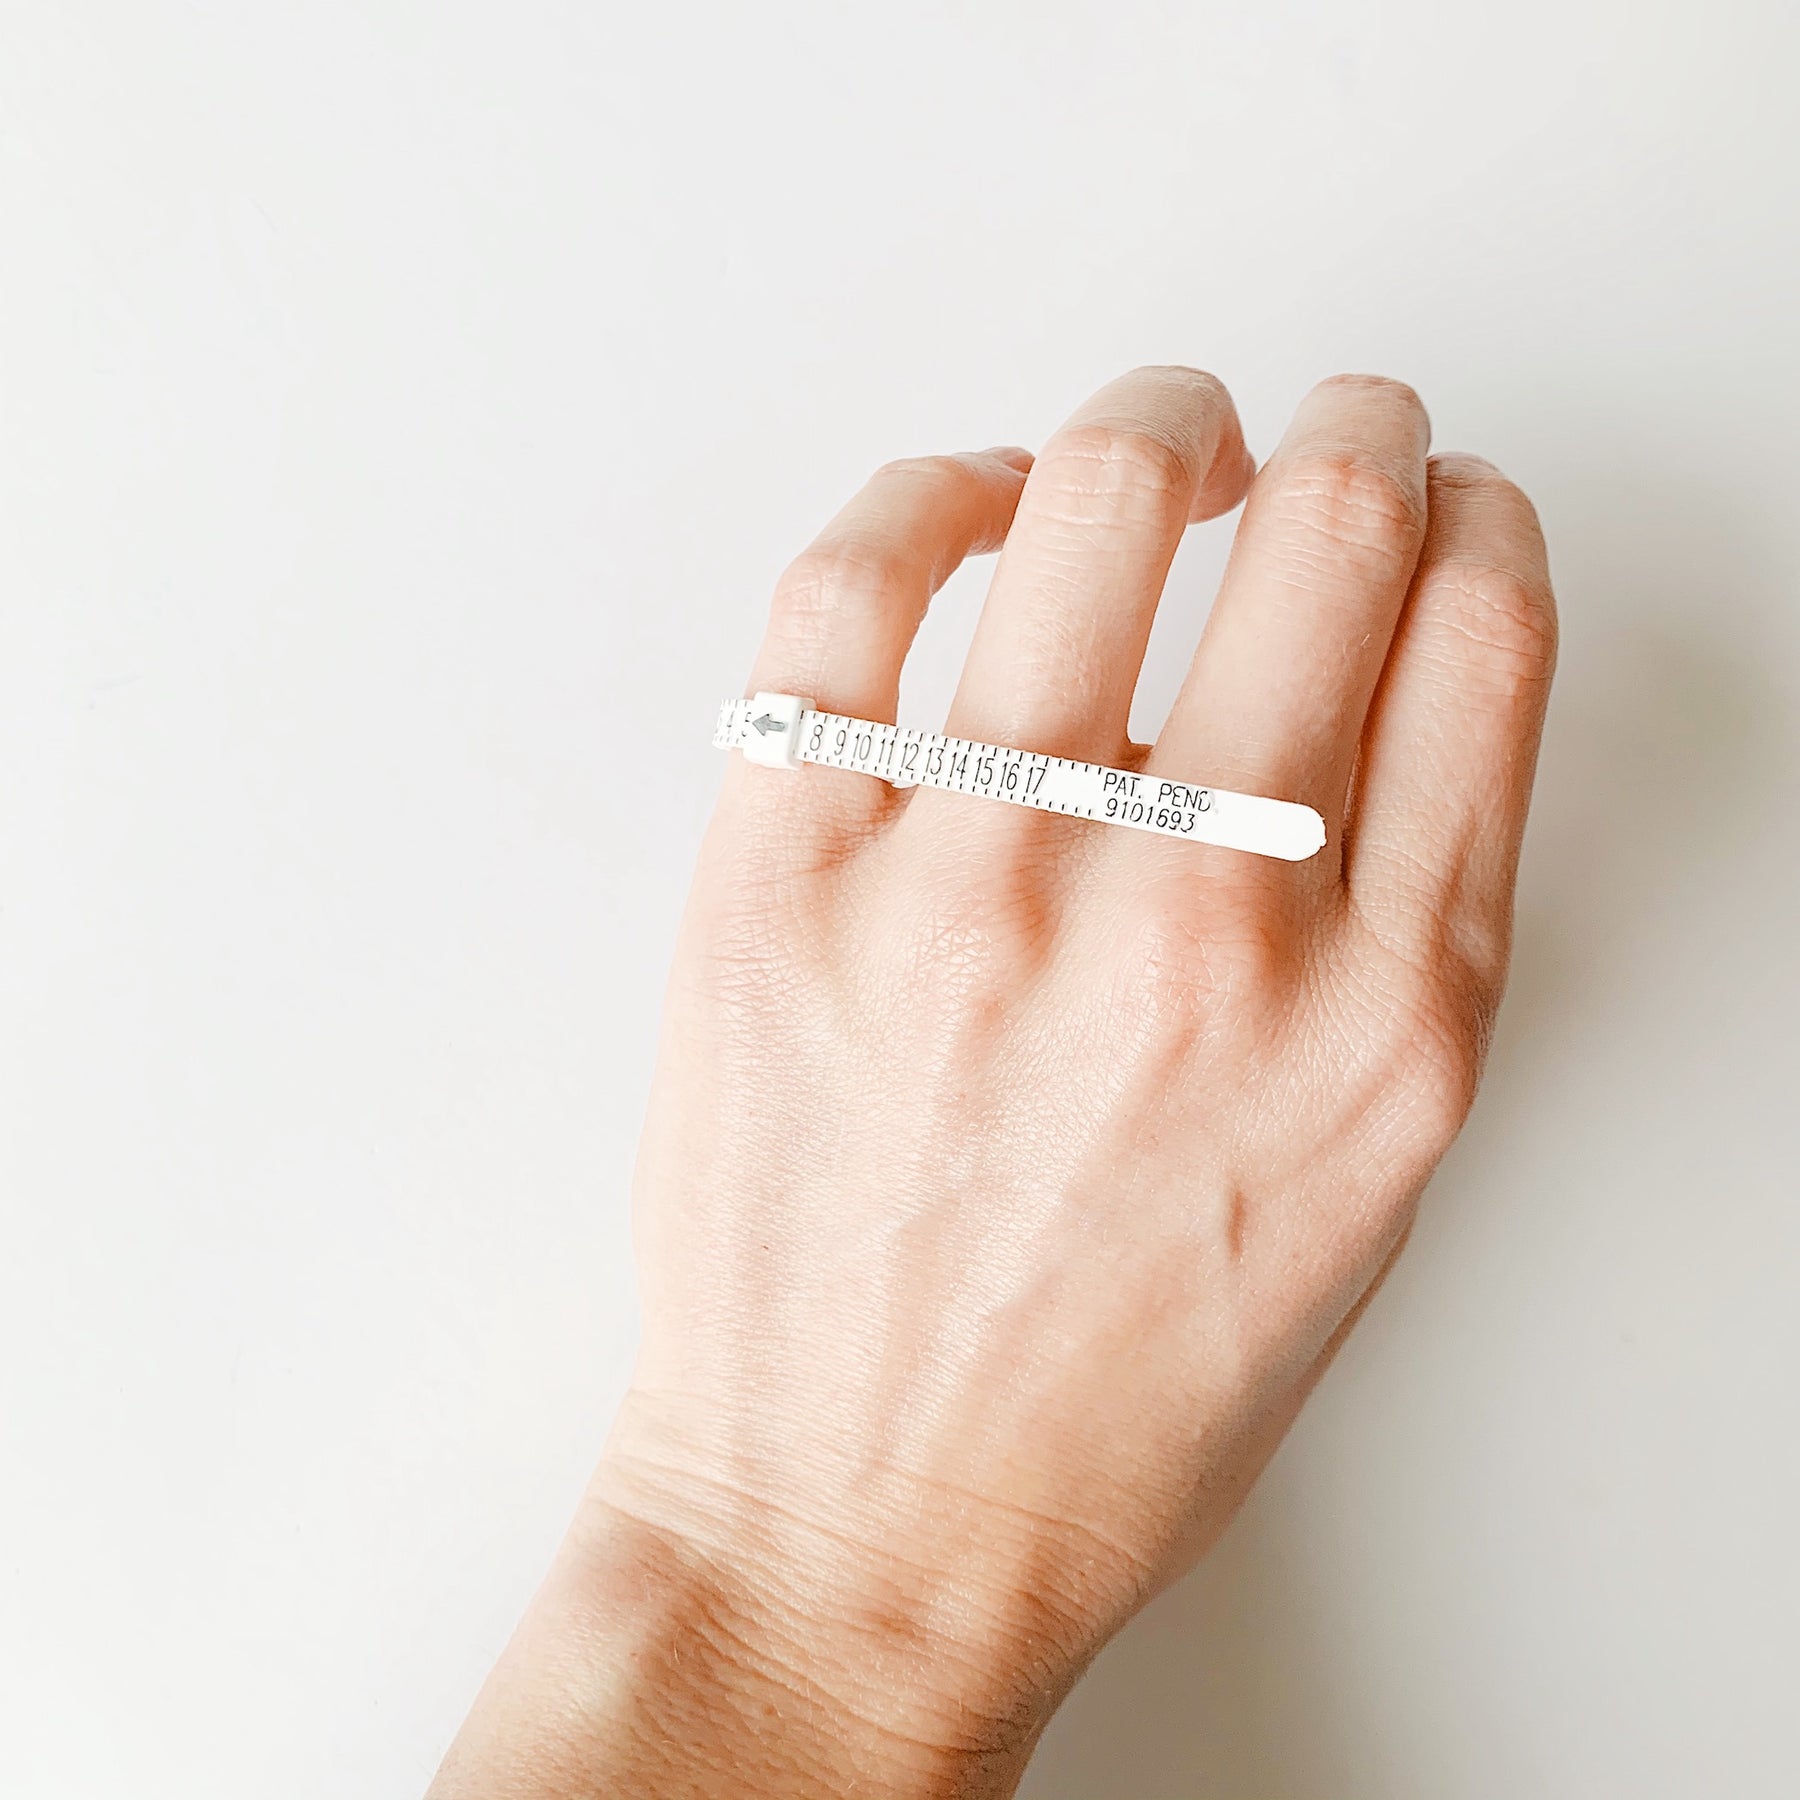 Ring Sizer Find Your Ring Size at Home Finger Sizer, Reusable Measuring Tool,  Sizes 1-17, Adjustable Ring Size Finder for Stacking Rings 